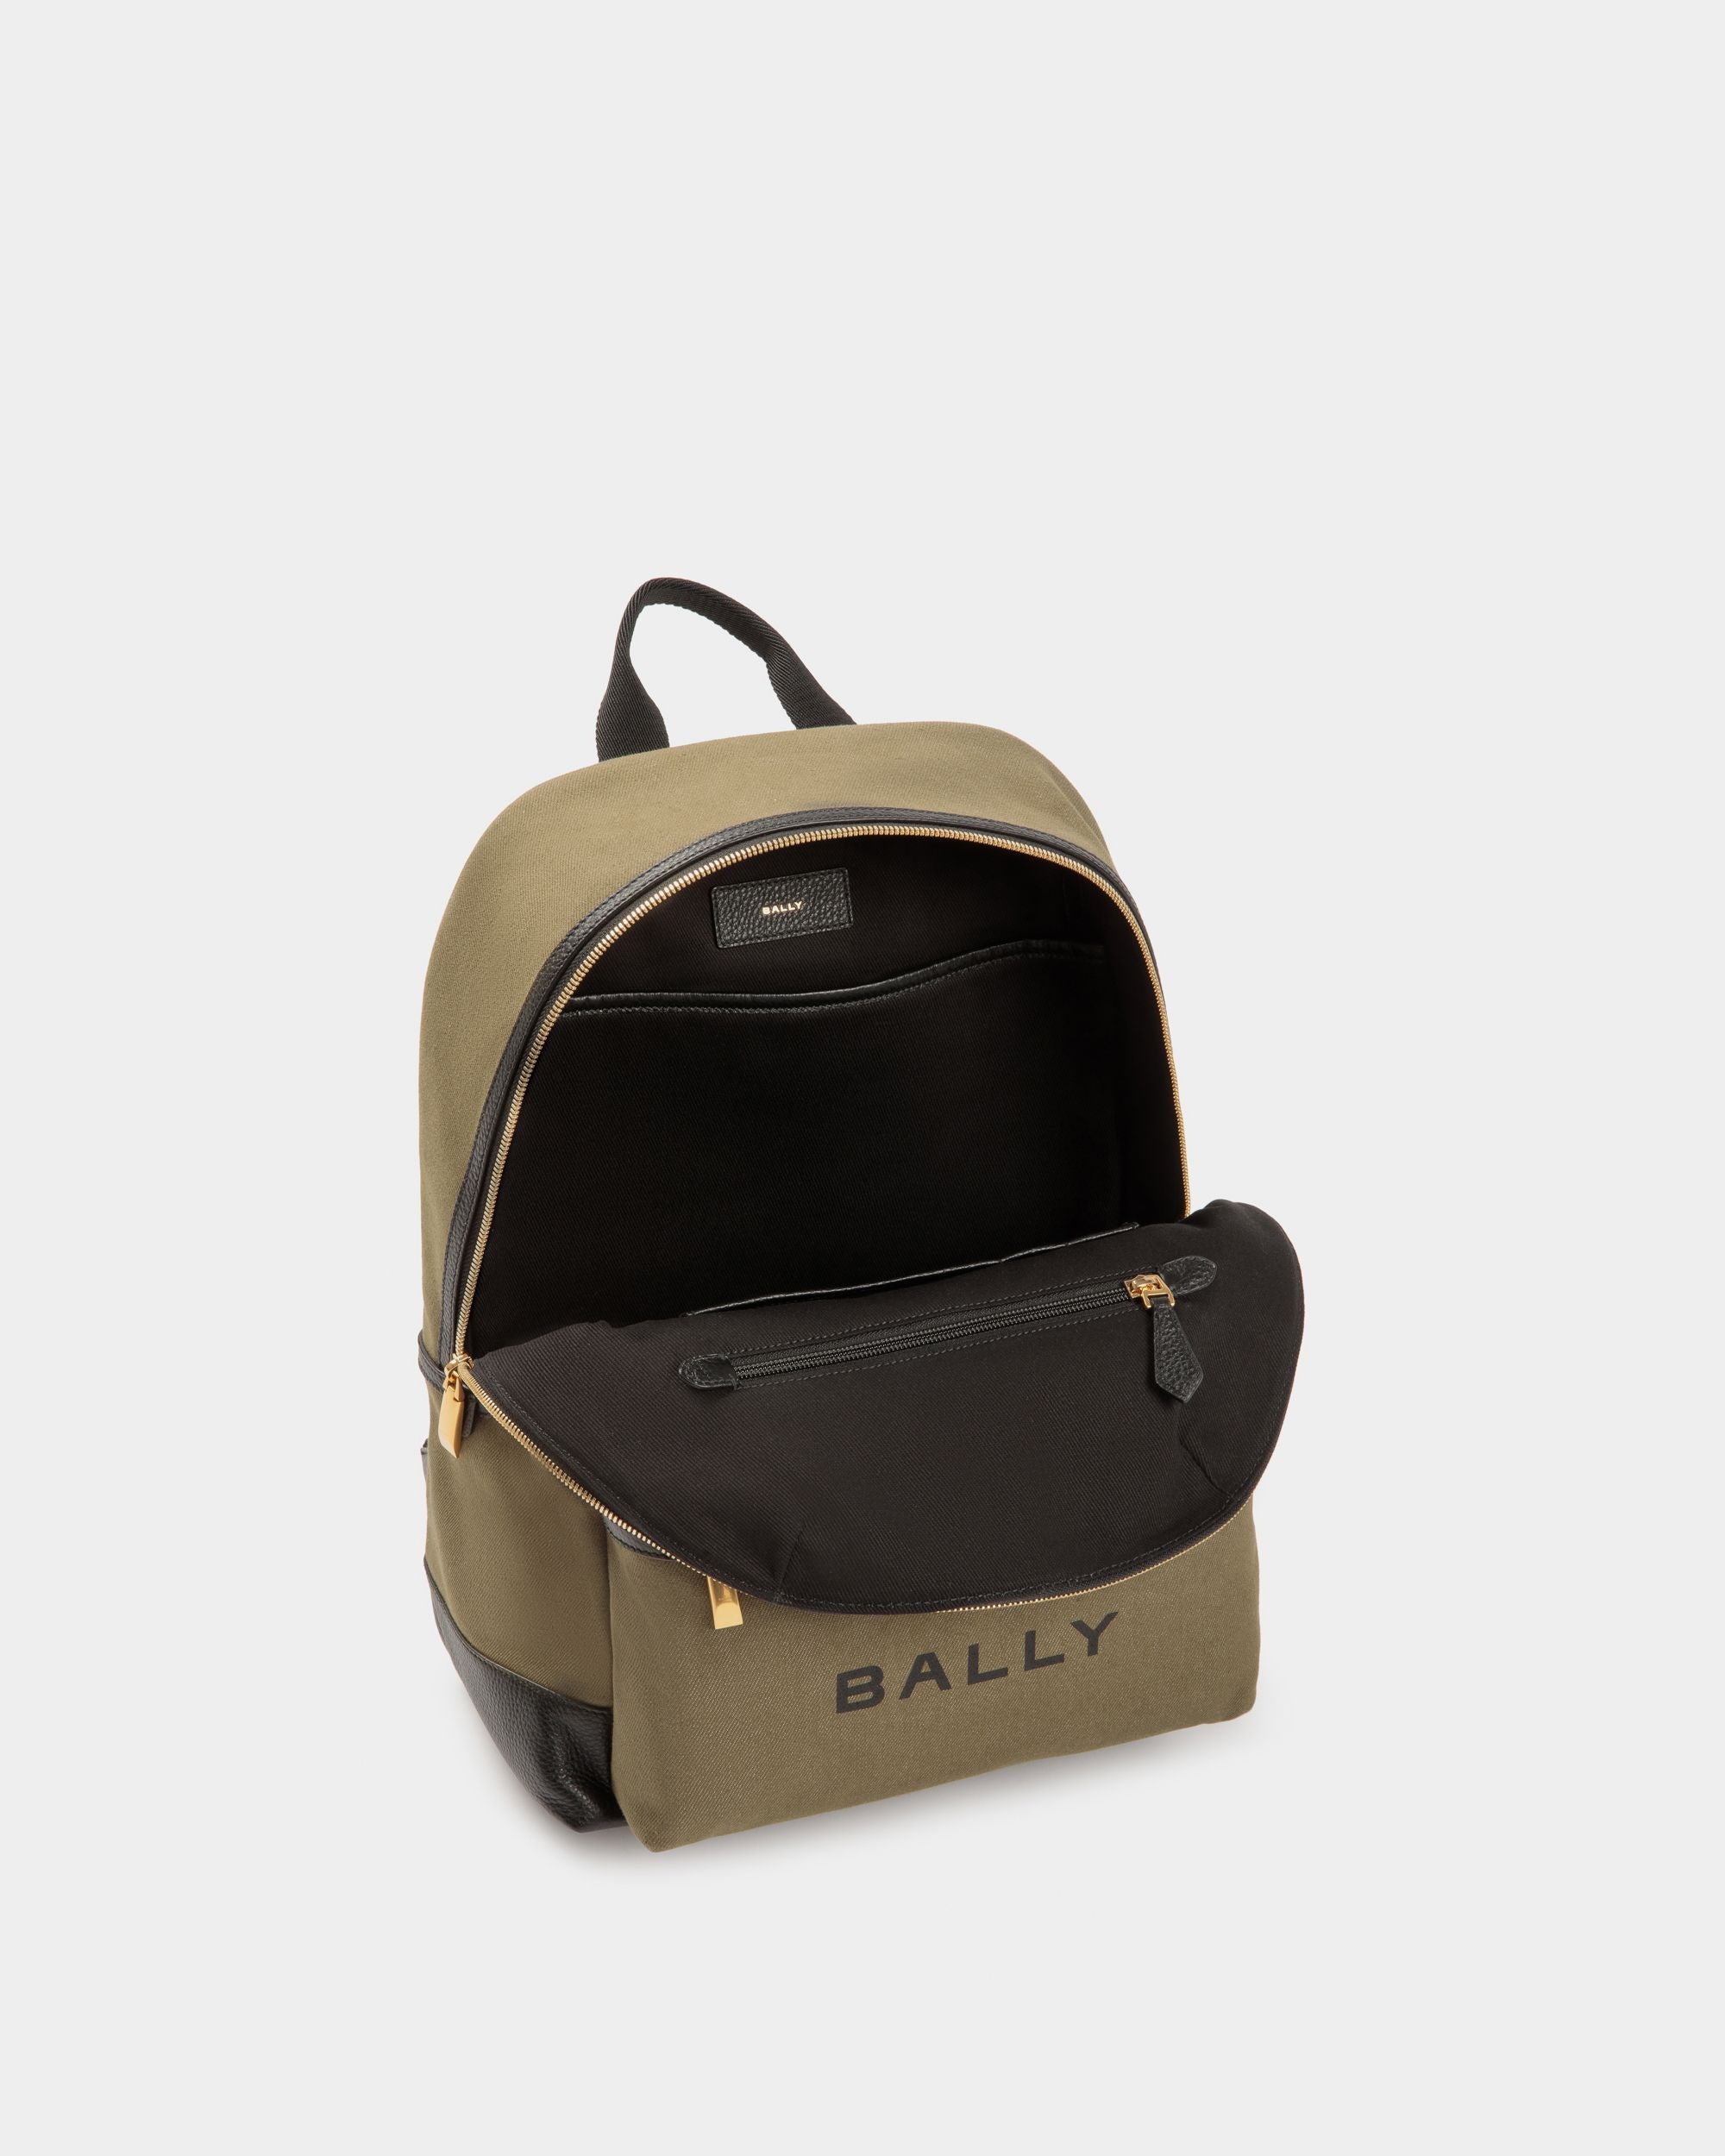 Bar | Men's Backpack in Green Canvas And Black Leather | Bally | Still Life Open / Inside